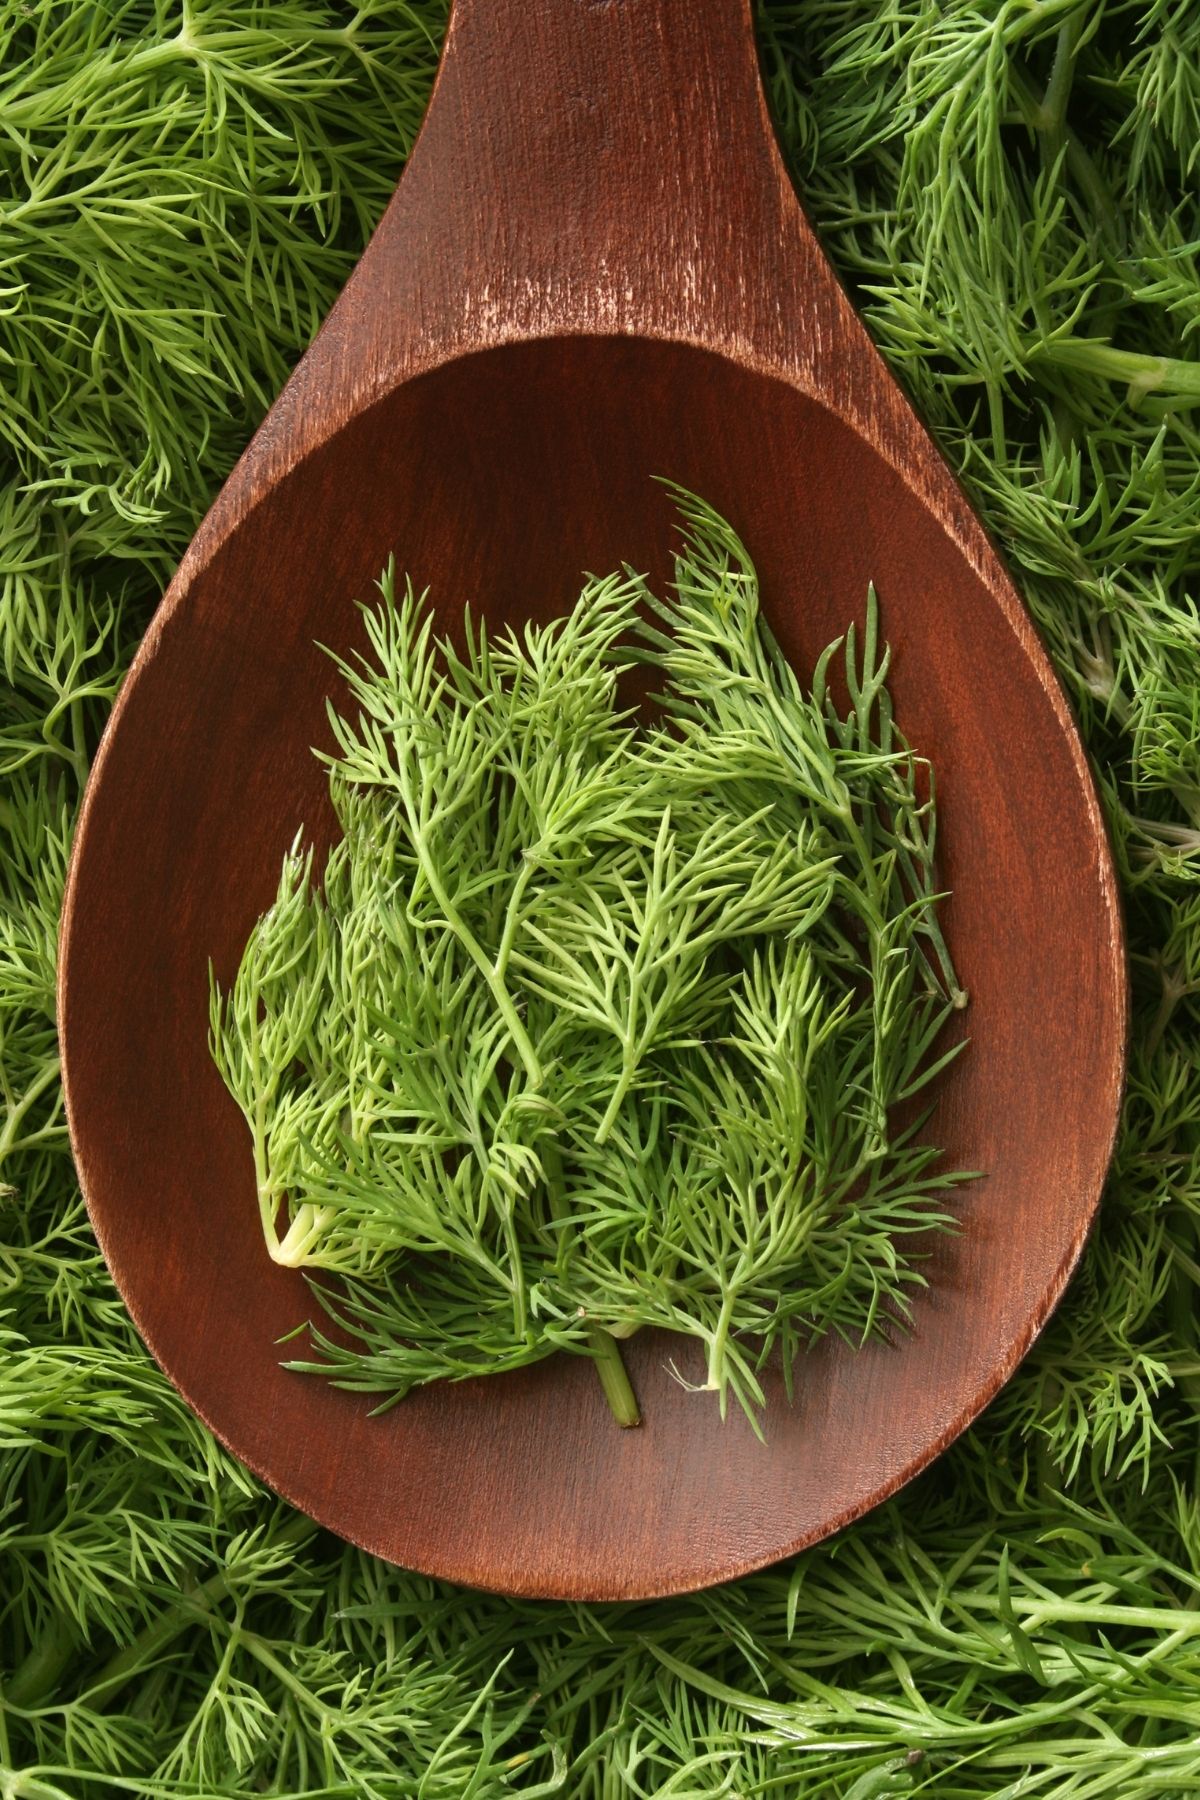 A wooden spoon with fresh dill on it.